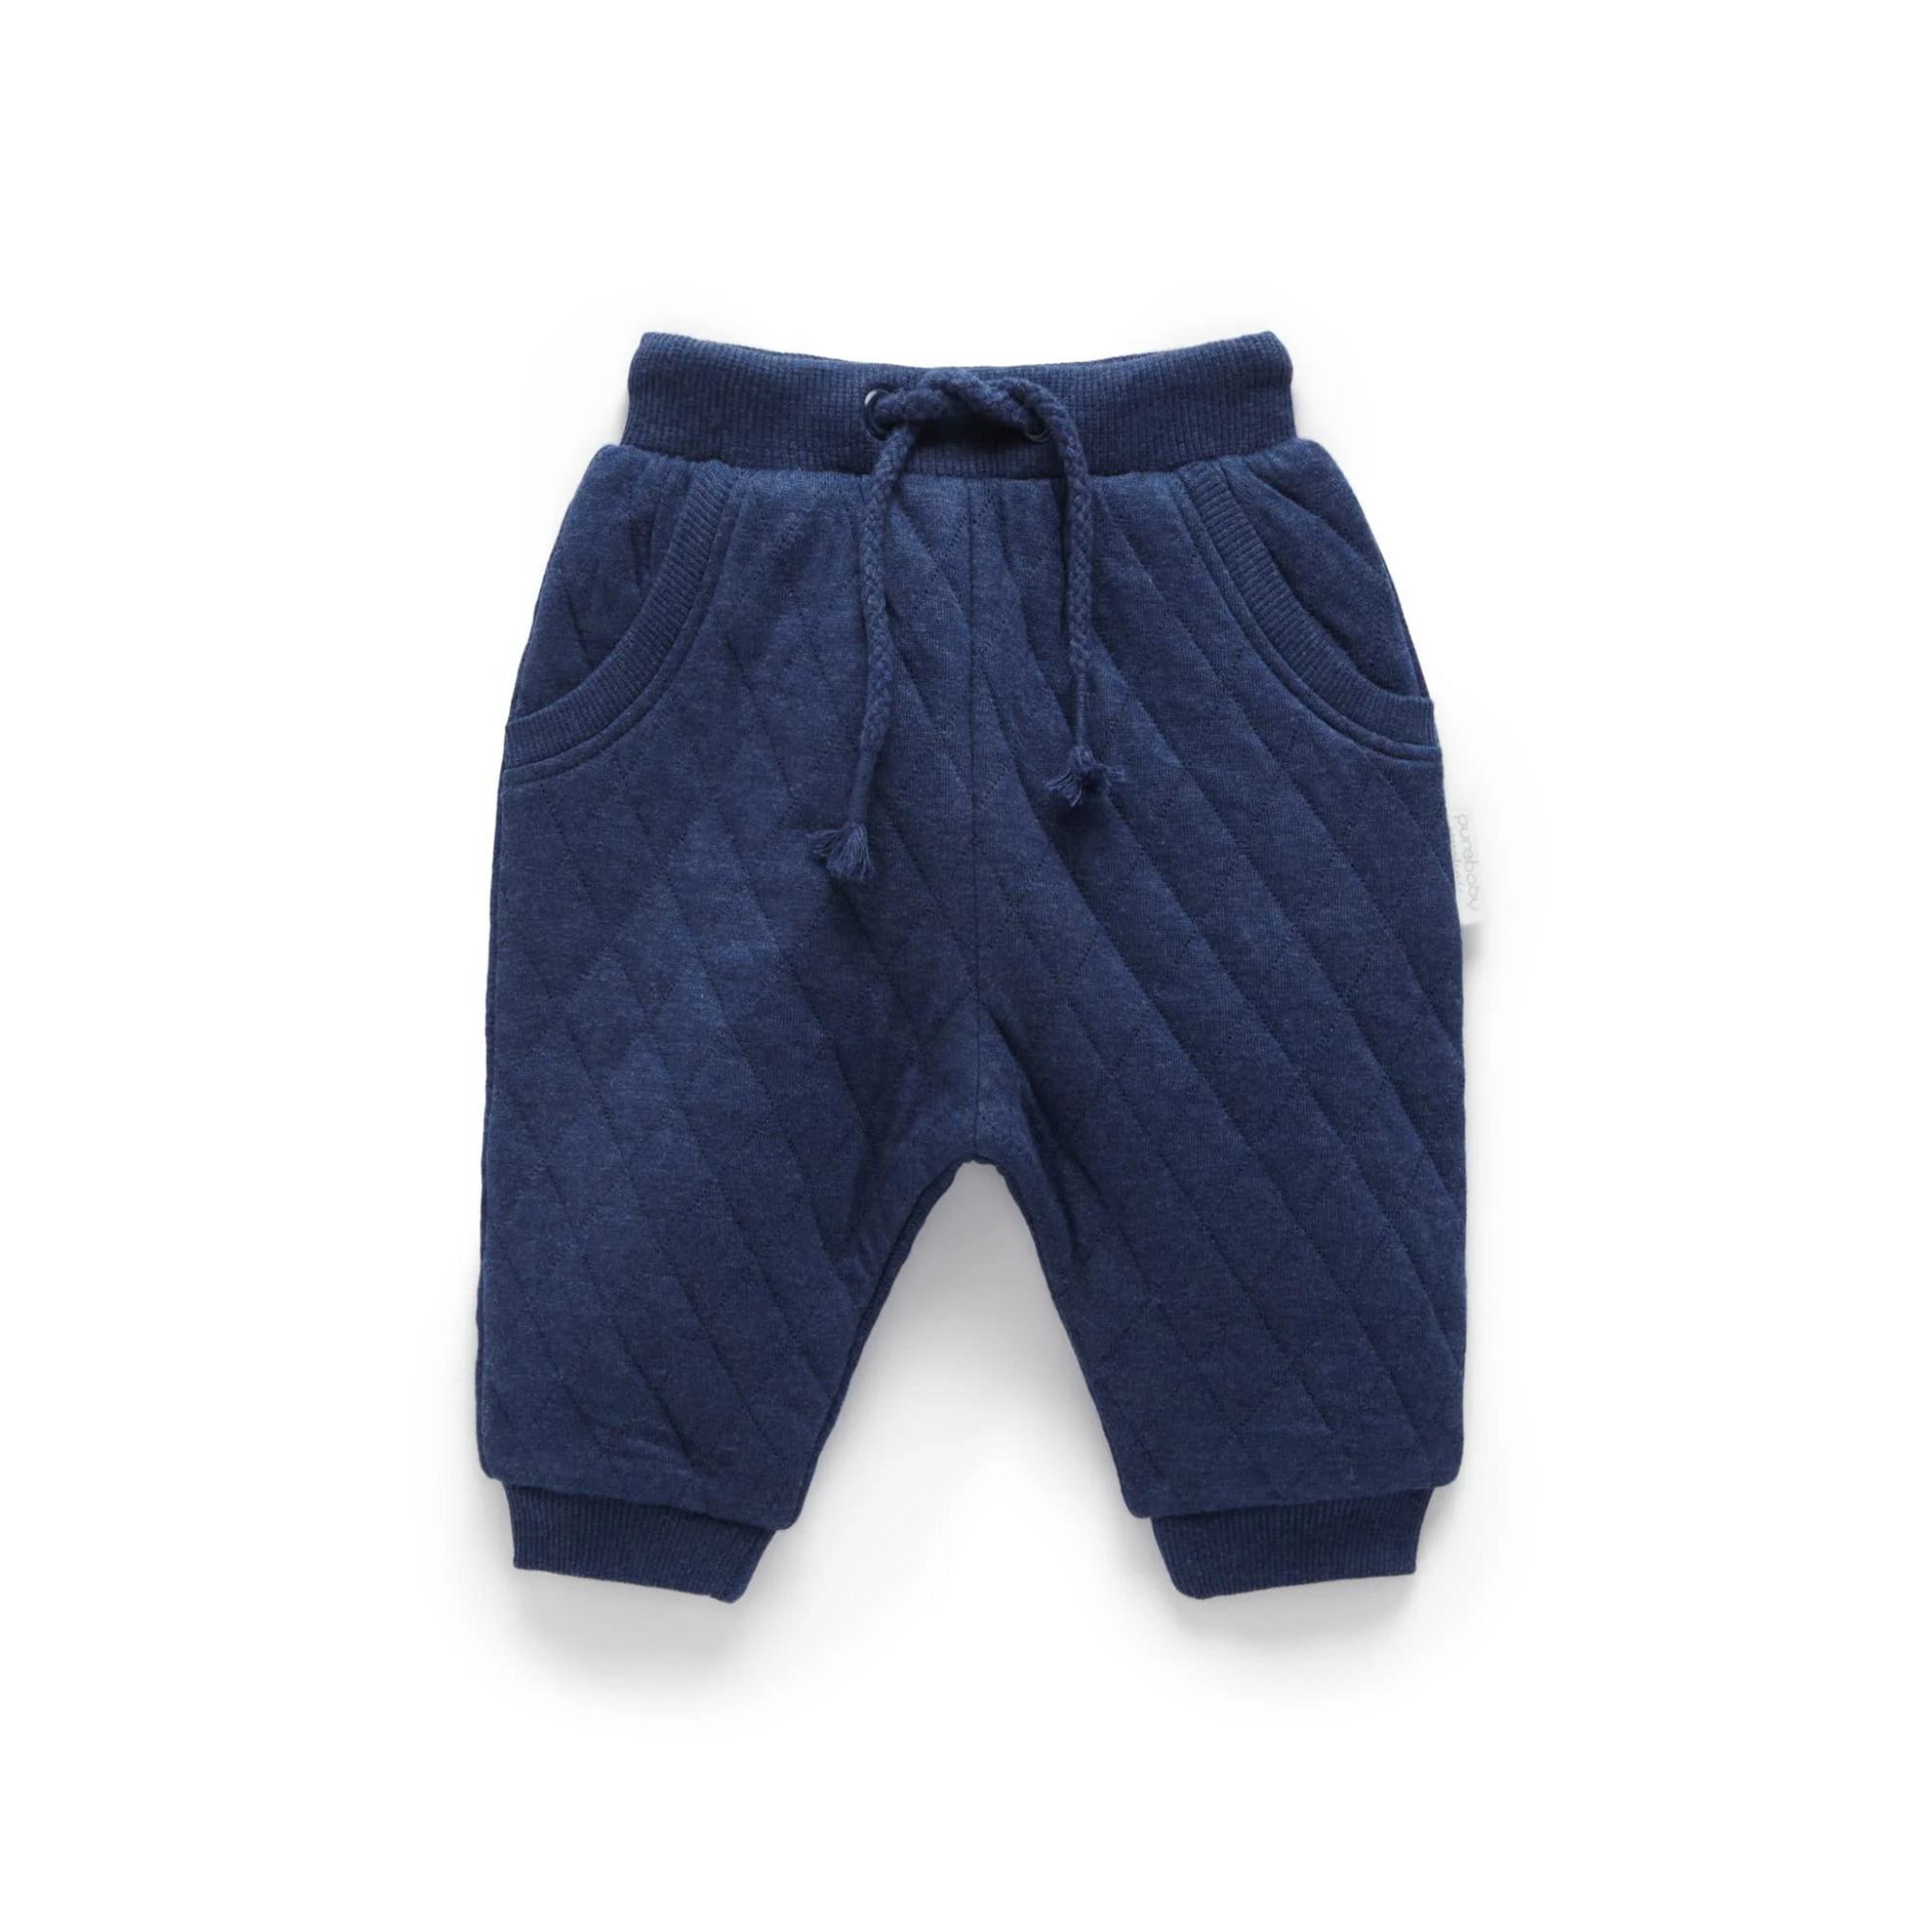 Purebaby Quilted Track Pants - Captain Melange